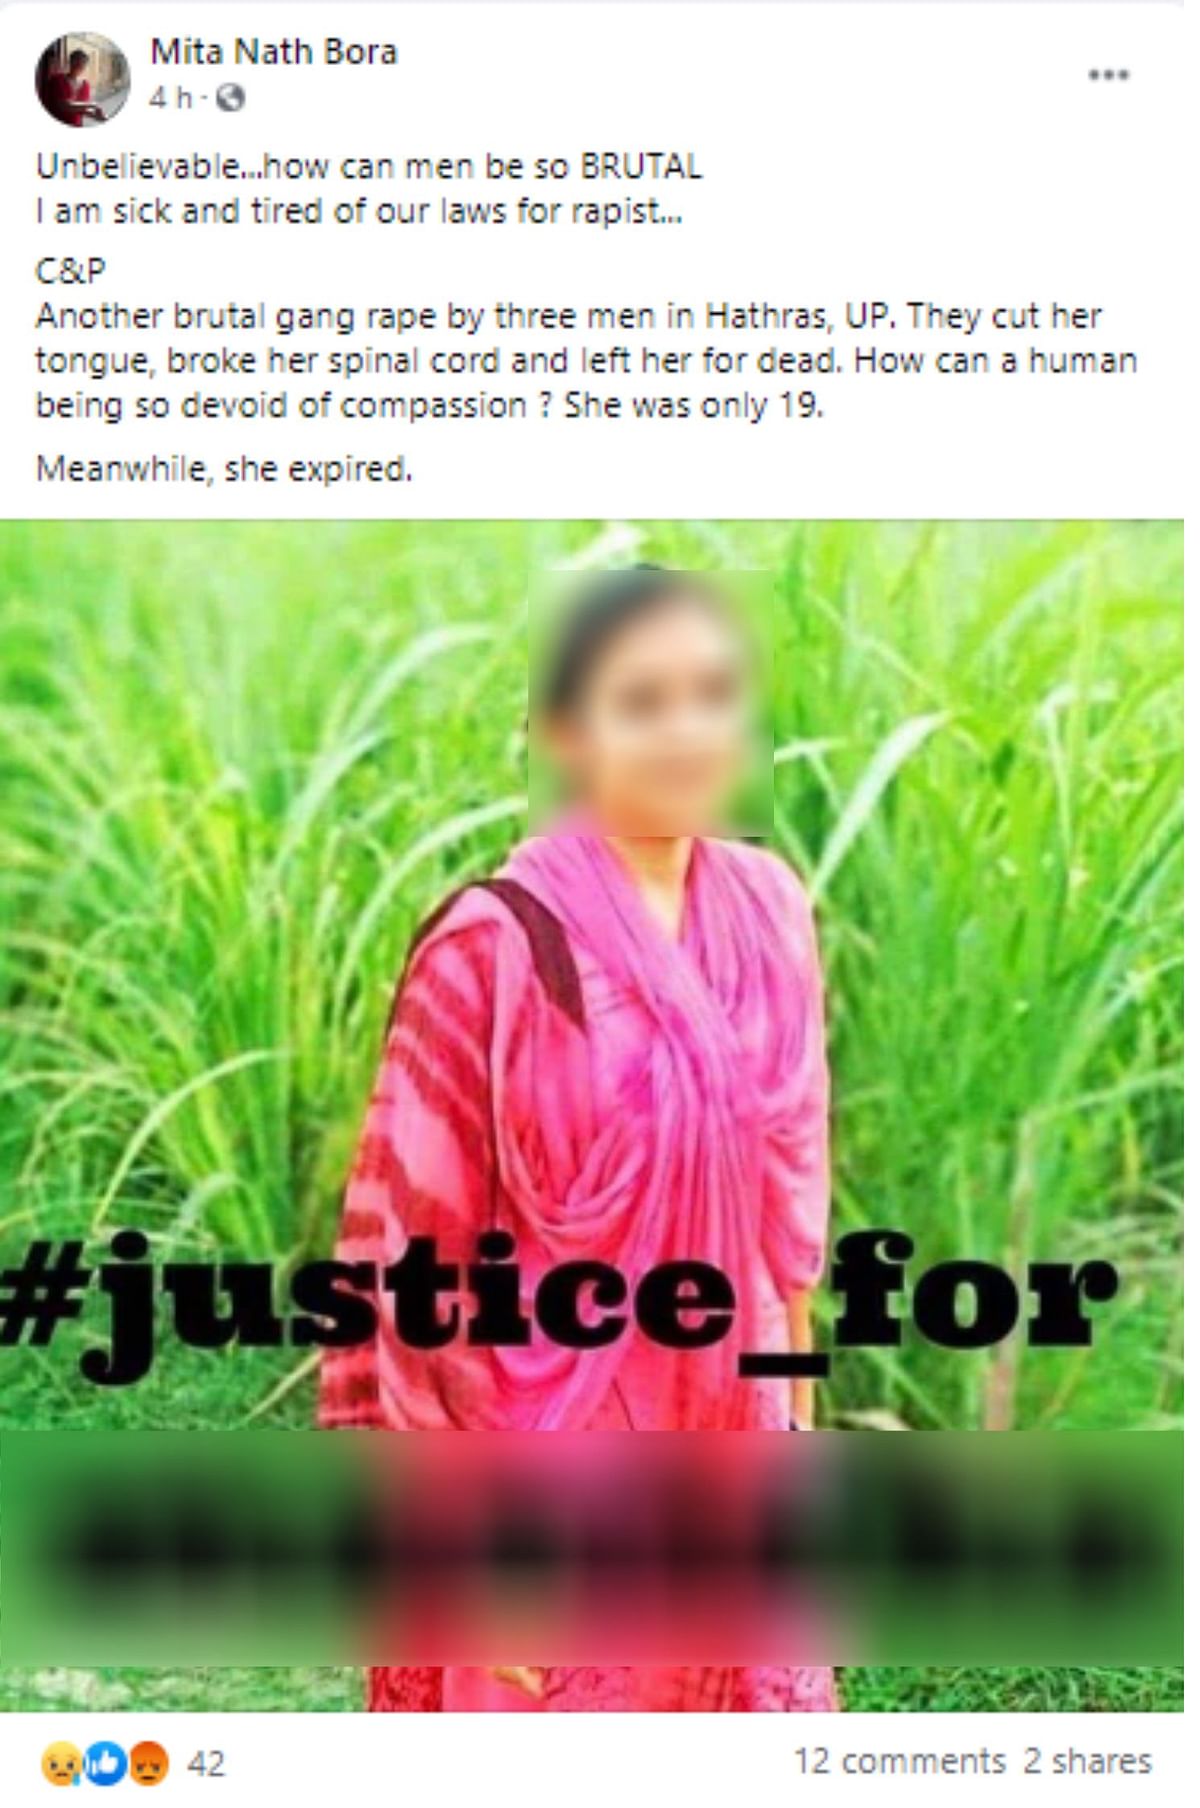 The brother of victim confirmed with The Quint that they do not know the girl in the viral image.